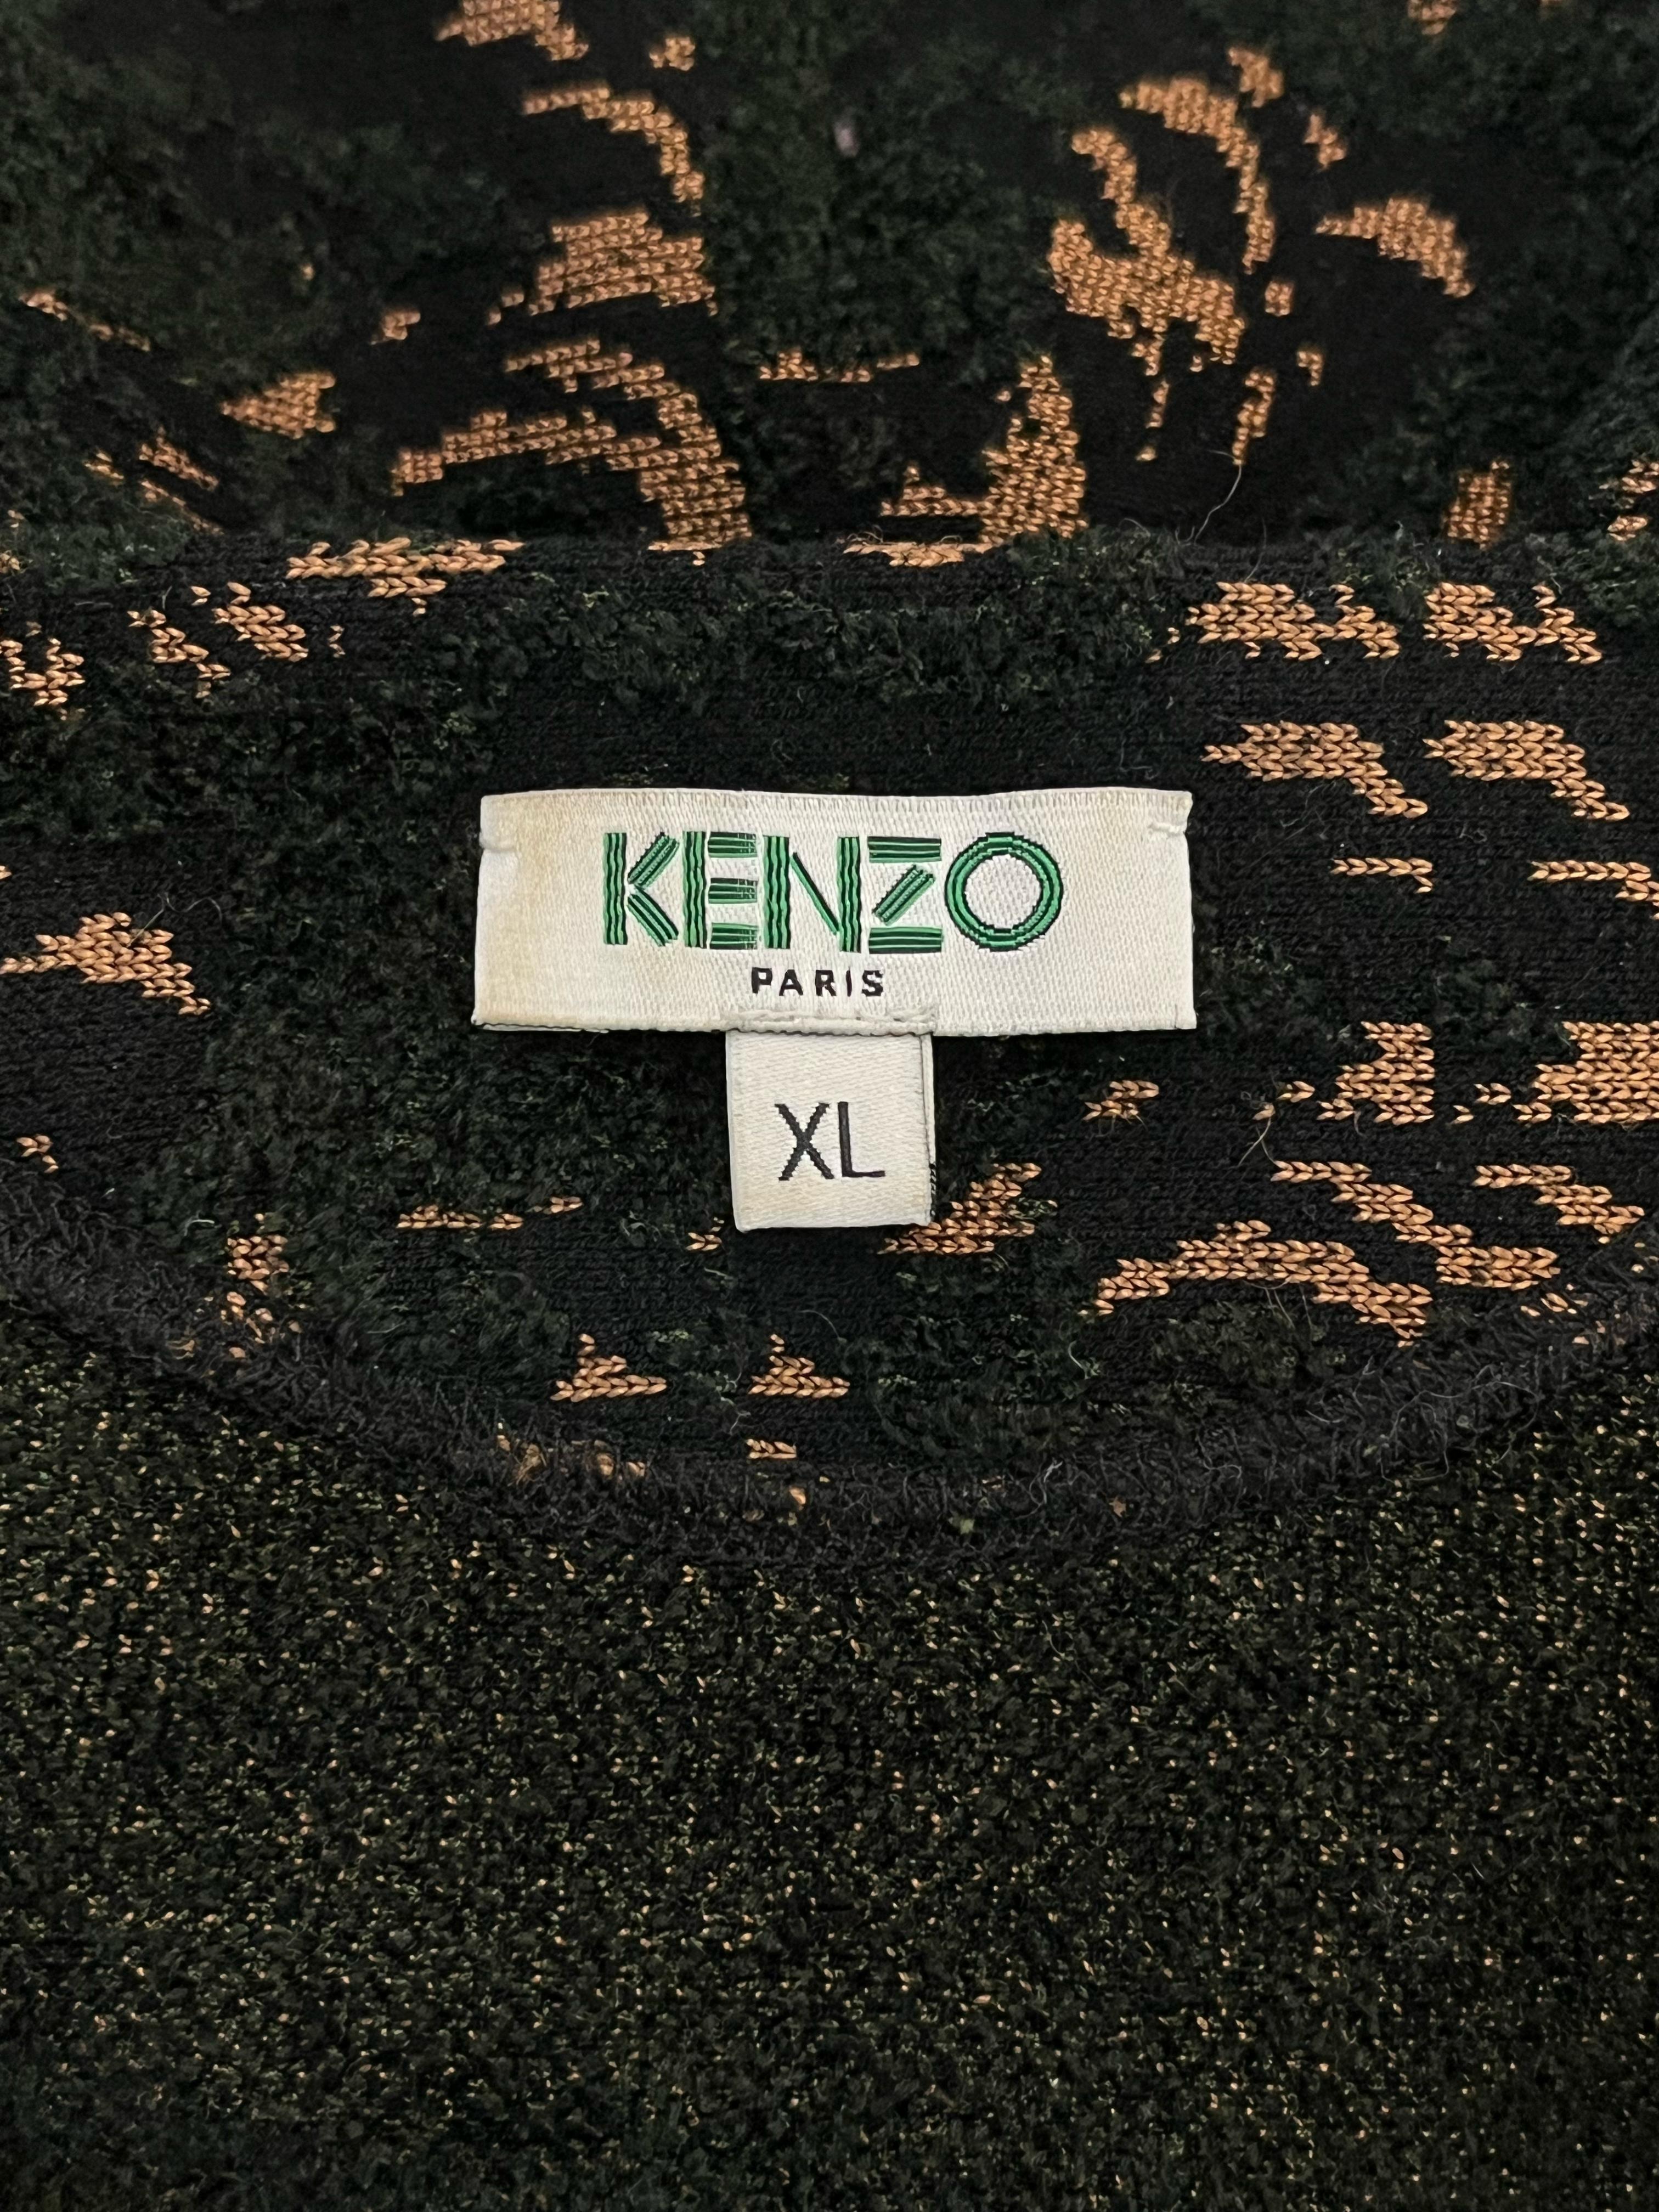 Kenzo Printed Knitted Dress For Sale 1